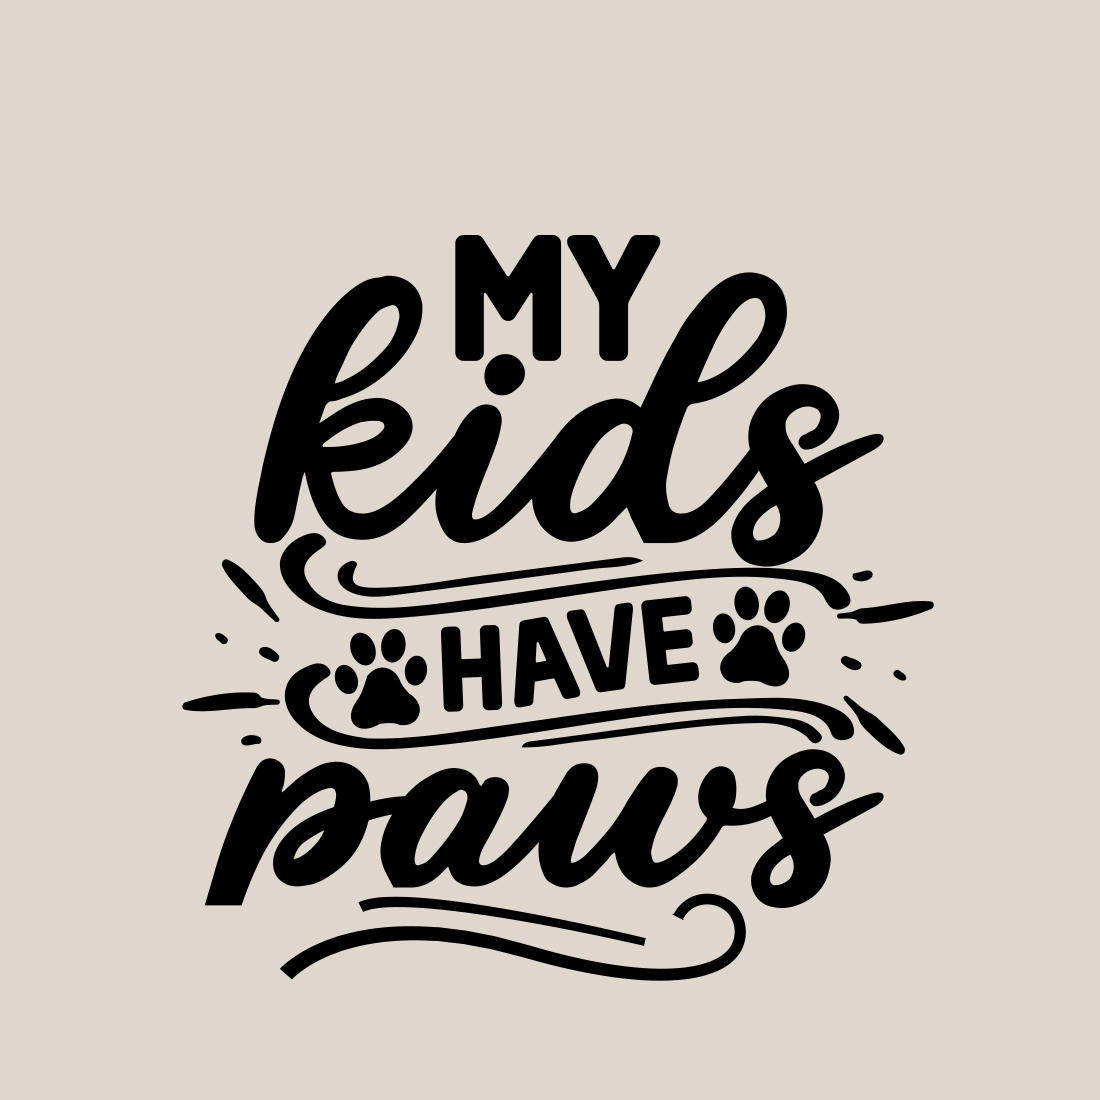 My kids have paws svg preview image.